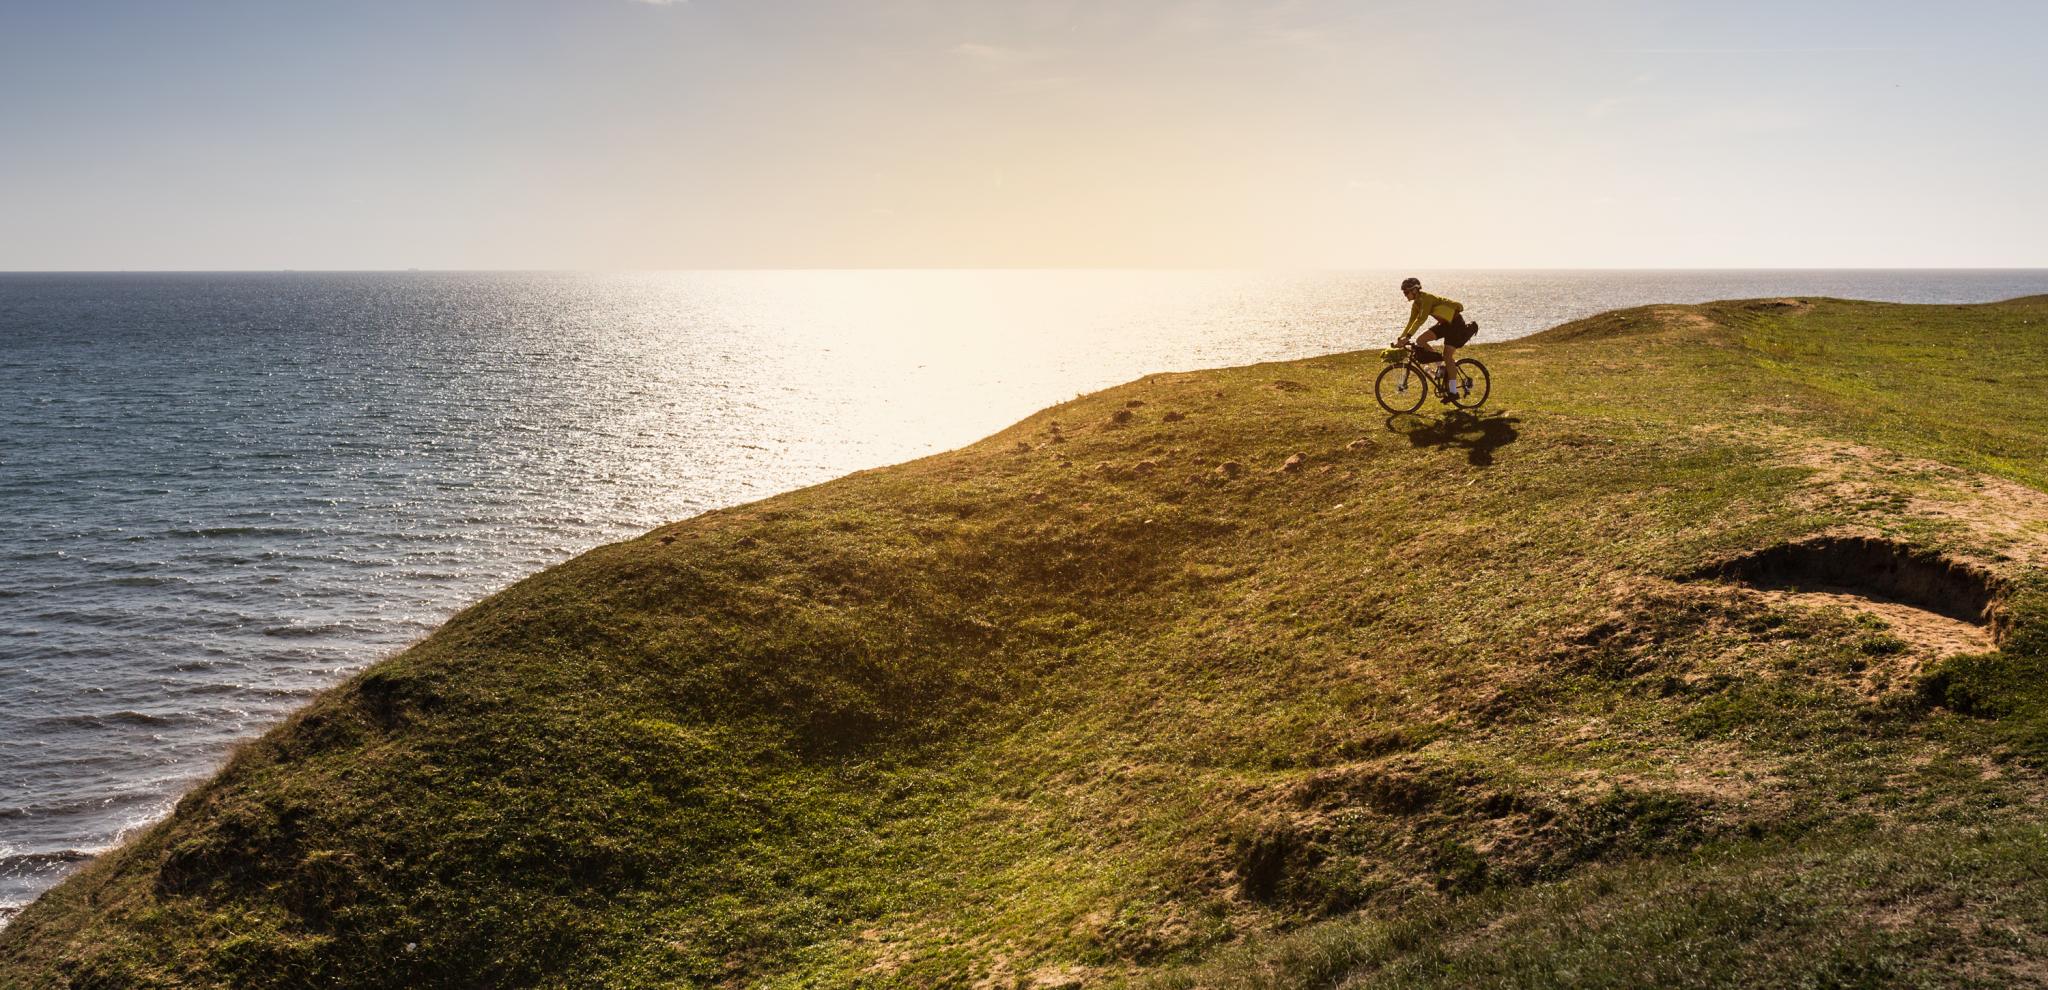 A man is cycling off the track, near the cliffs of Ale's rocks